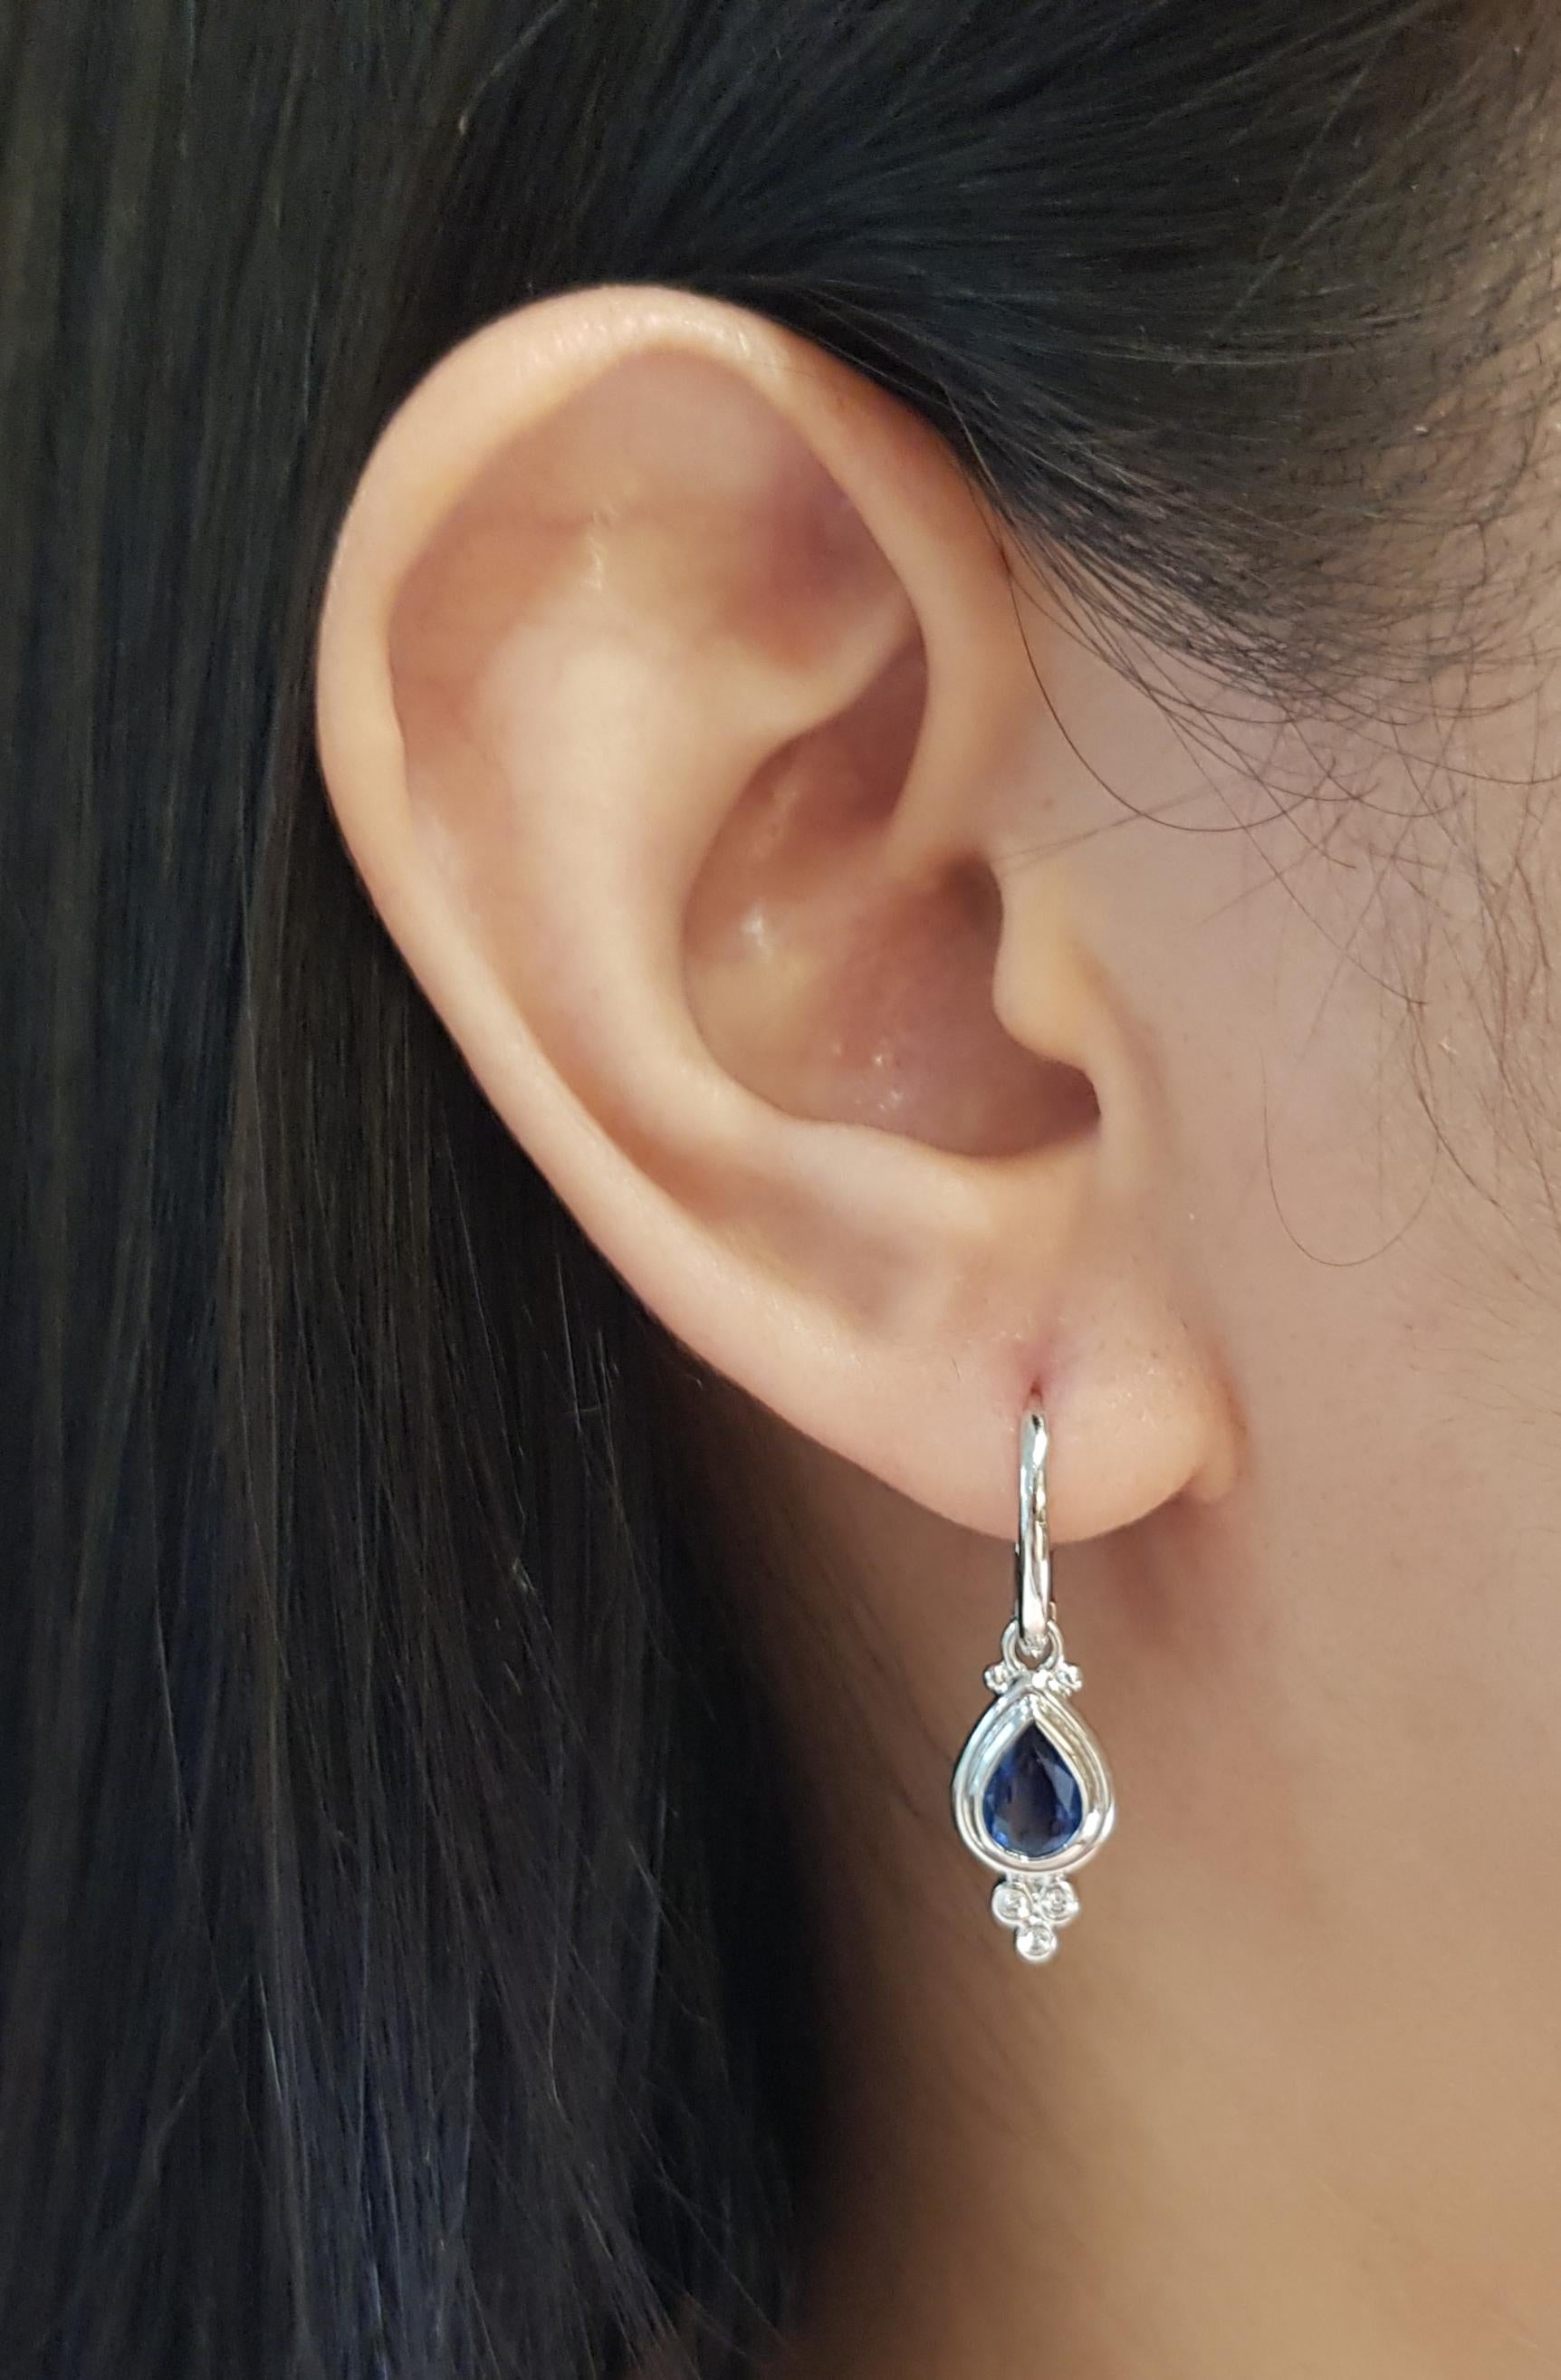 Blue Sapphire 0.79 carats with Diamond 0.07 carat Earrings set in 18K White Gold Settings

Width: 0.8 cm 
Length: 2.7 cm
Total Weight: 4.62 grams

